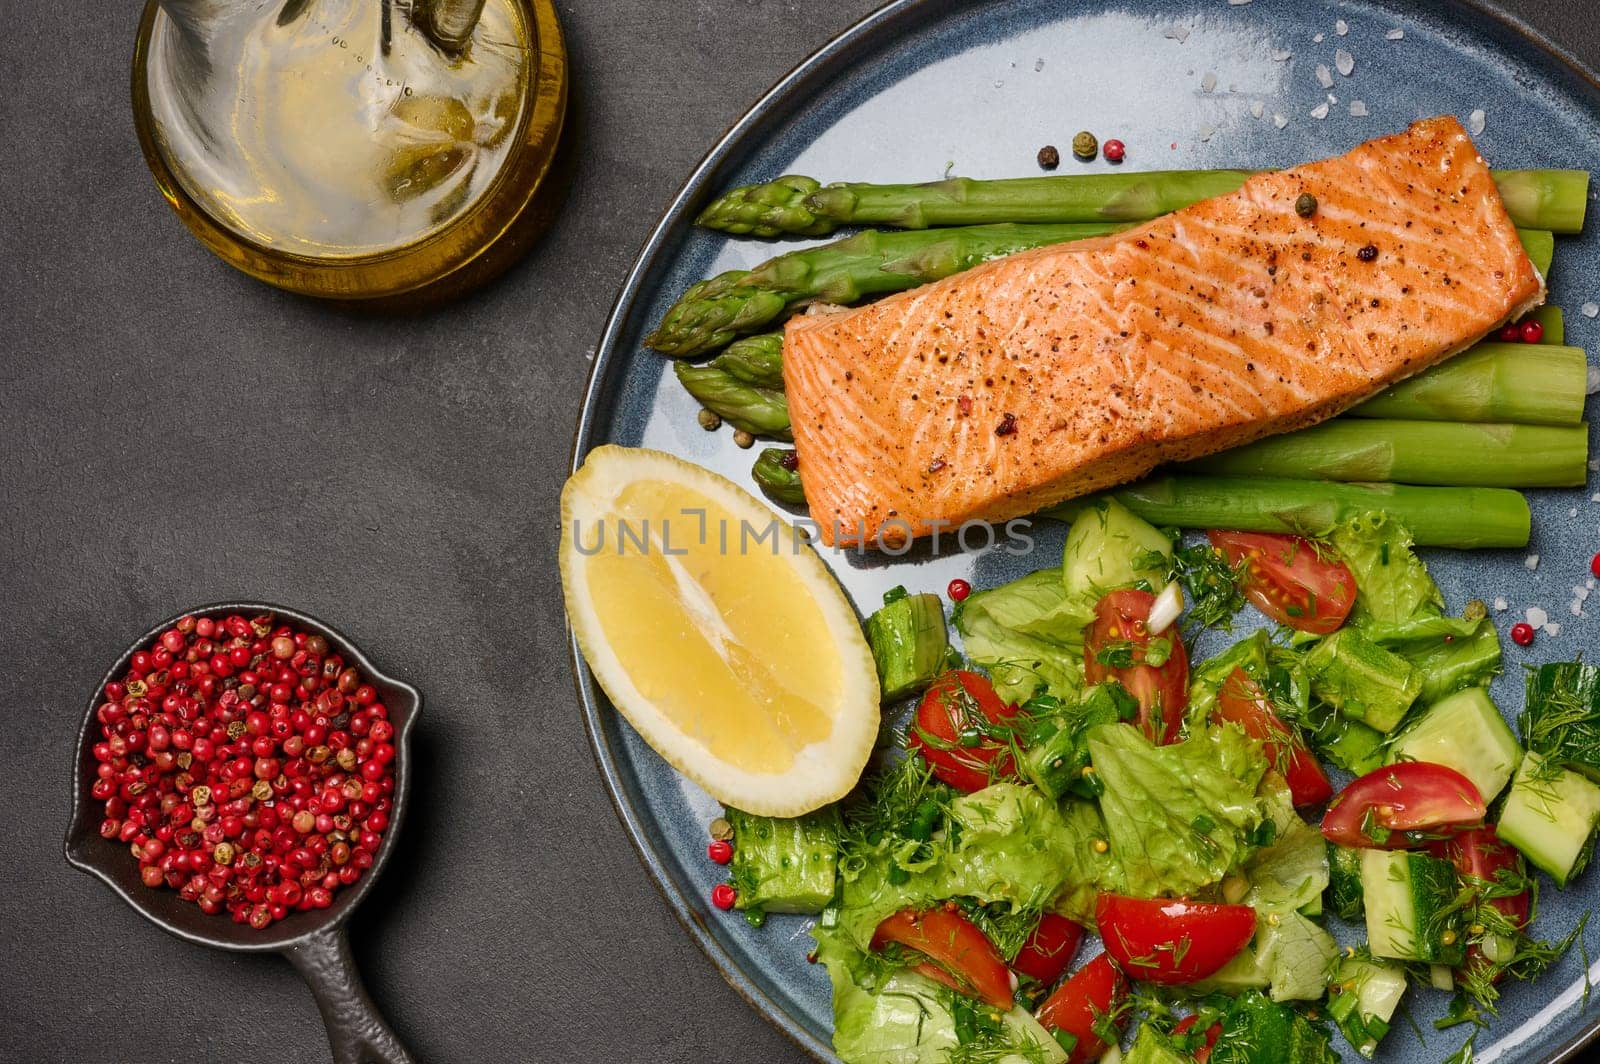 Healthy lunch with grilled salmon with asparagus and fresh tomato and cucumber salad, lemon slice. Food on a blue round plate, top view